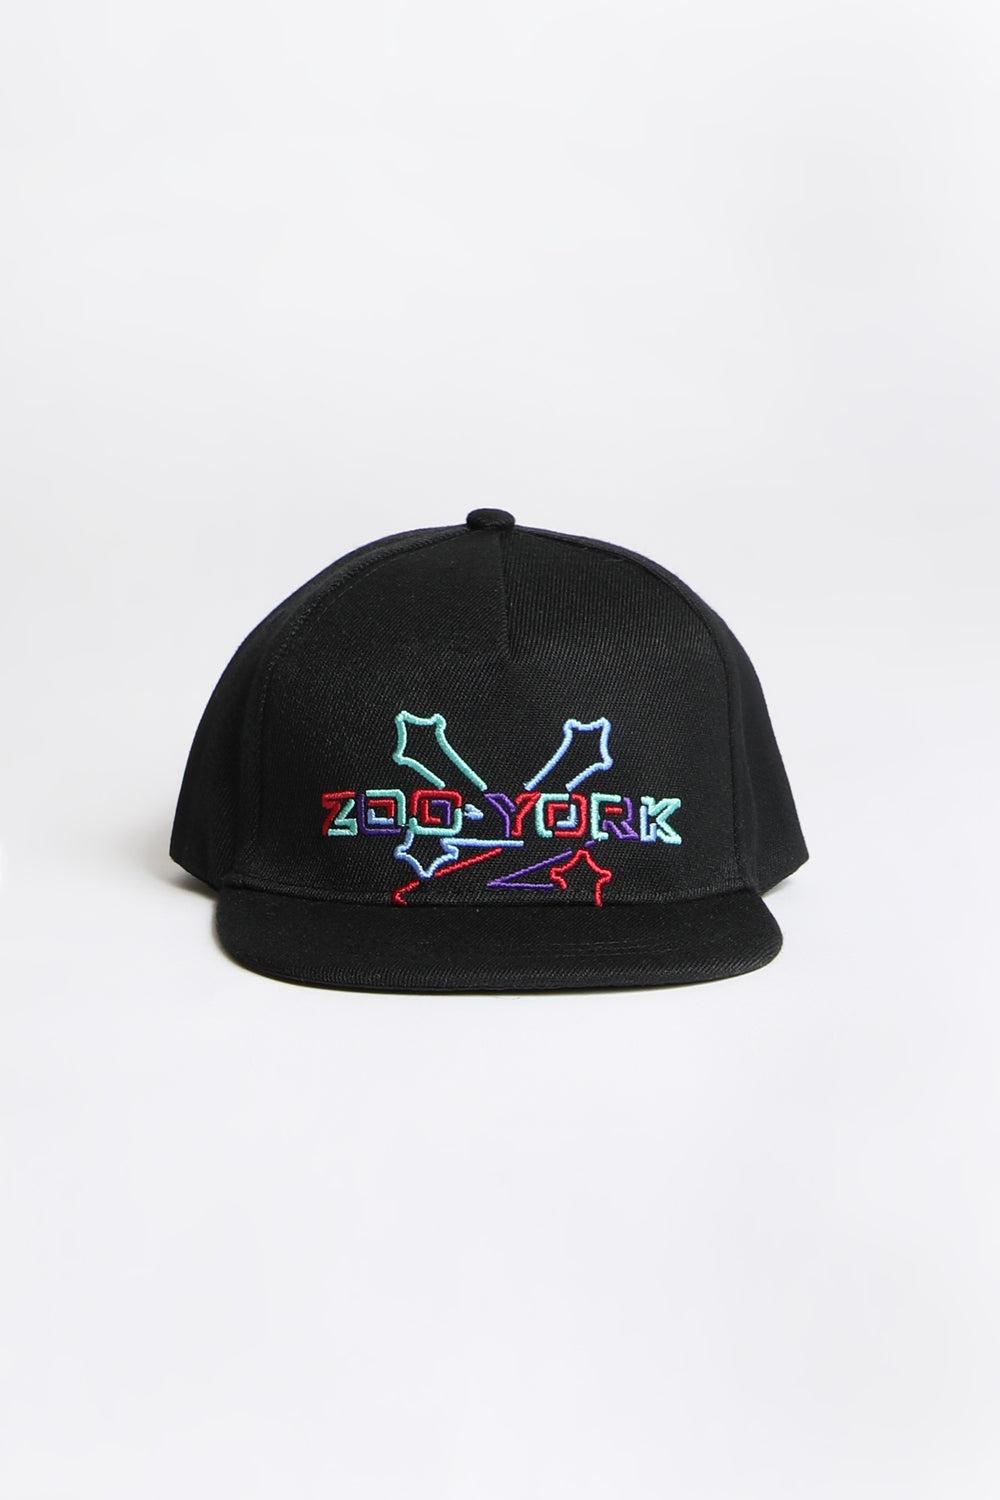 Zoo York Youth 3D Embroidered Logo Flat Brim Hat Zoo York Youth 3D Embroidered Logo Flat Brim Hat